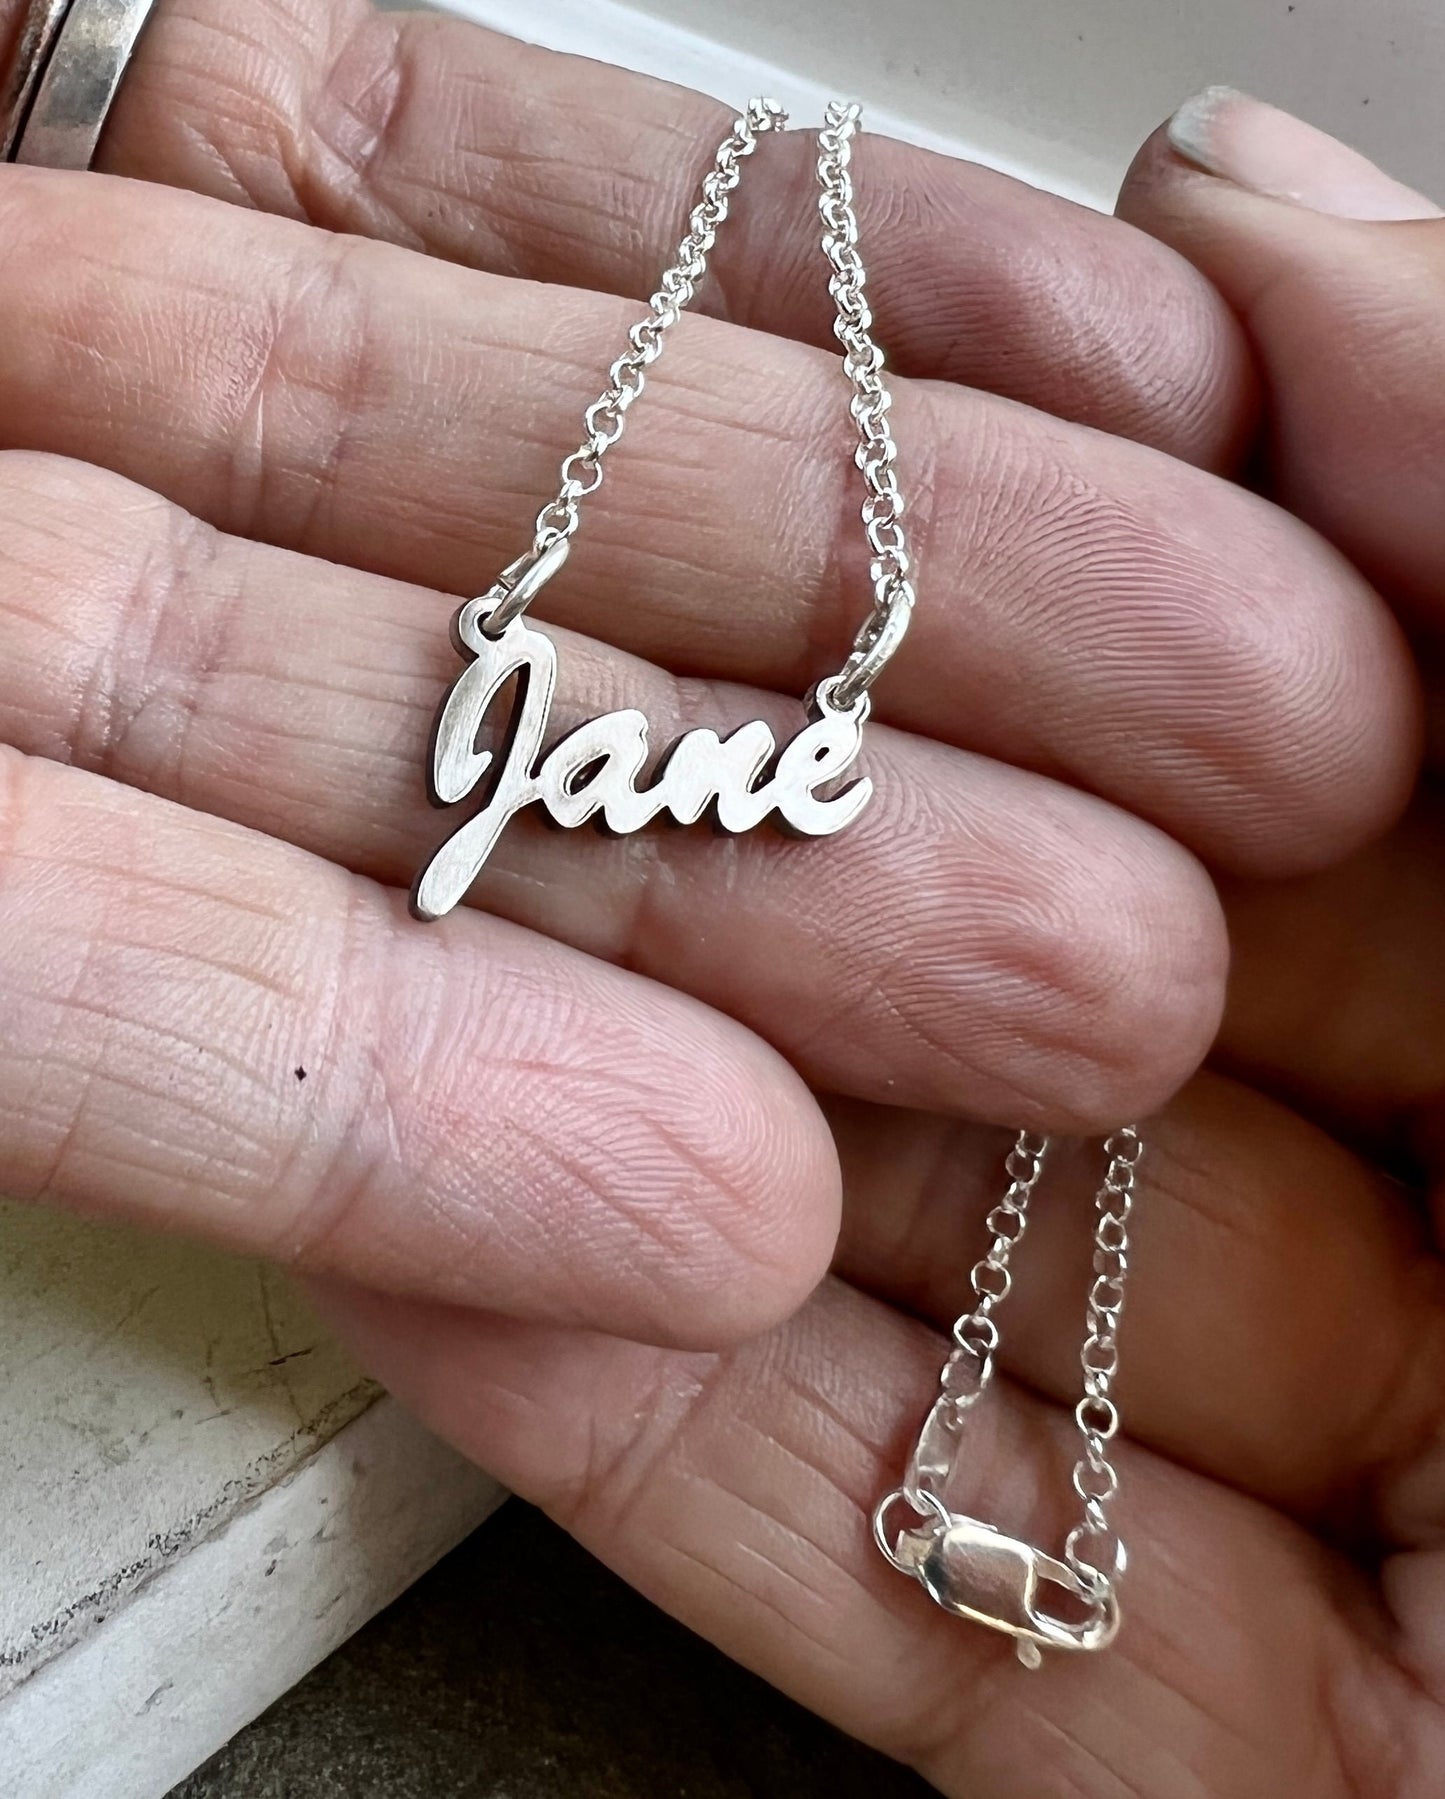 Name Plate Necklace in Solid Sterling Silver